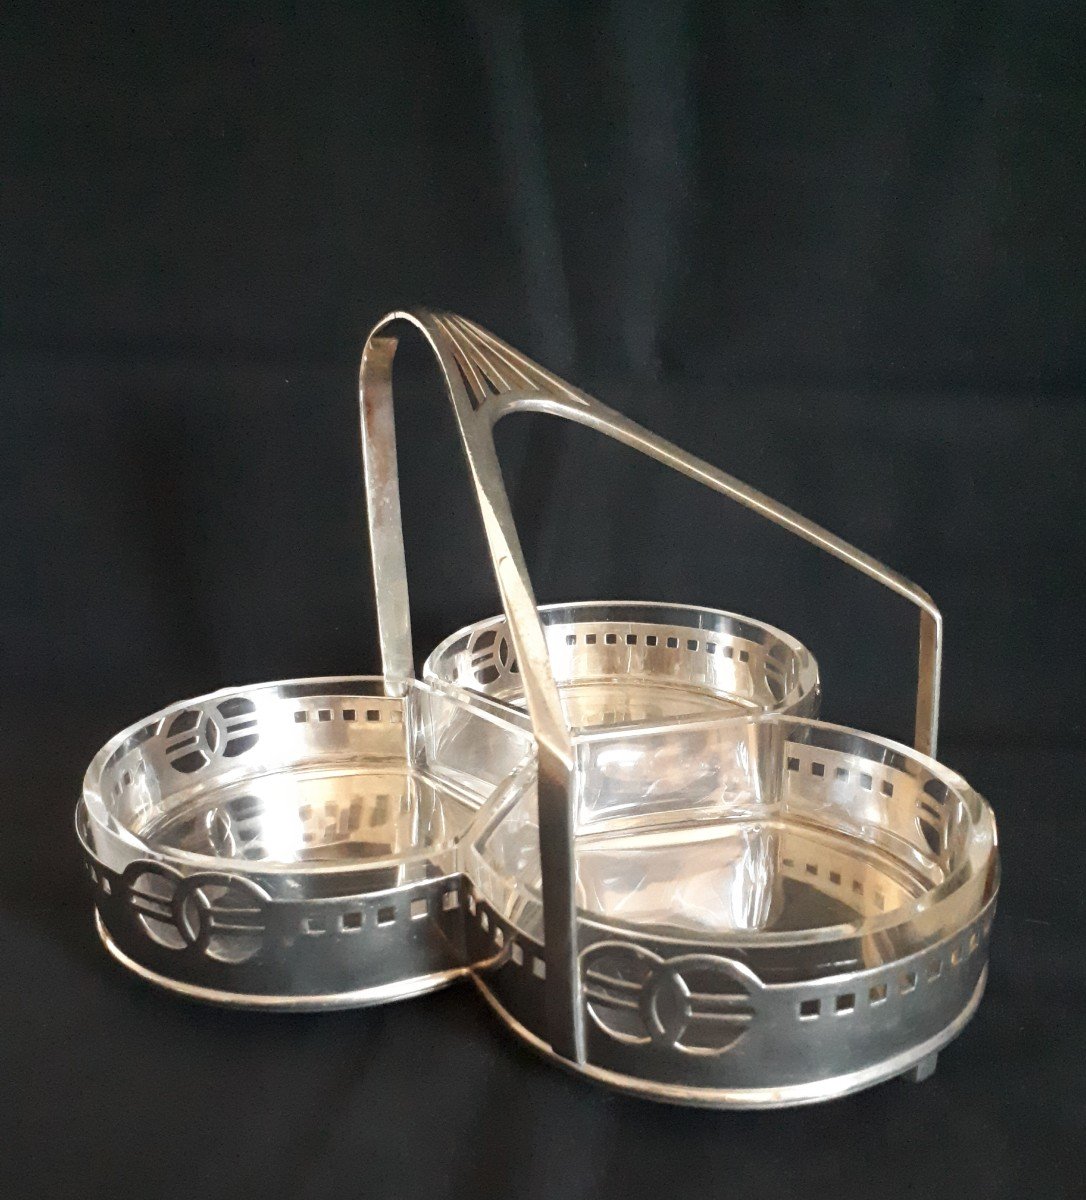 Wmf Hors d'Oeuvres Dish In Silver Plated Metal And Glass 1910